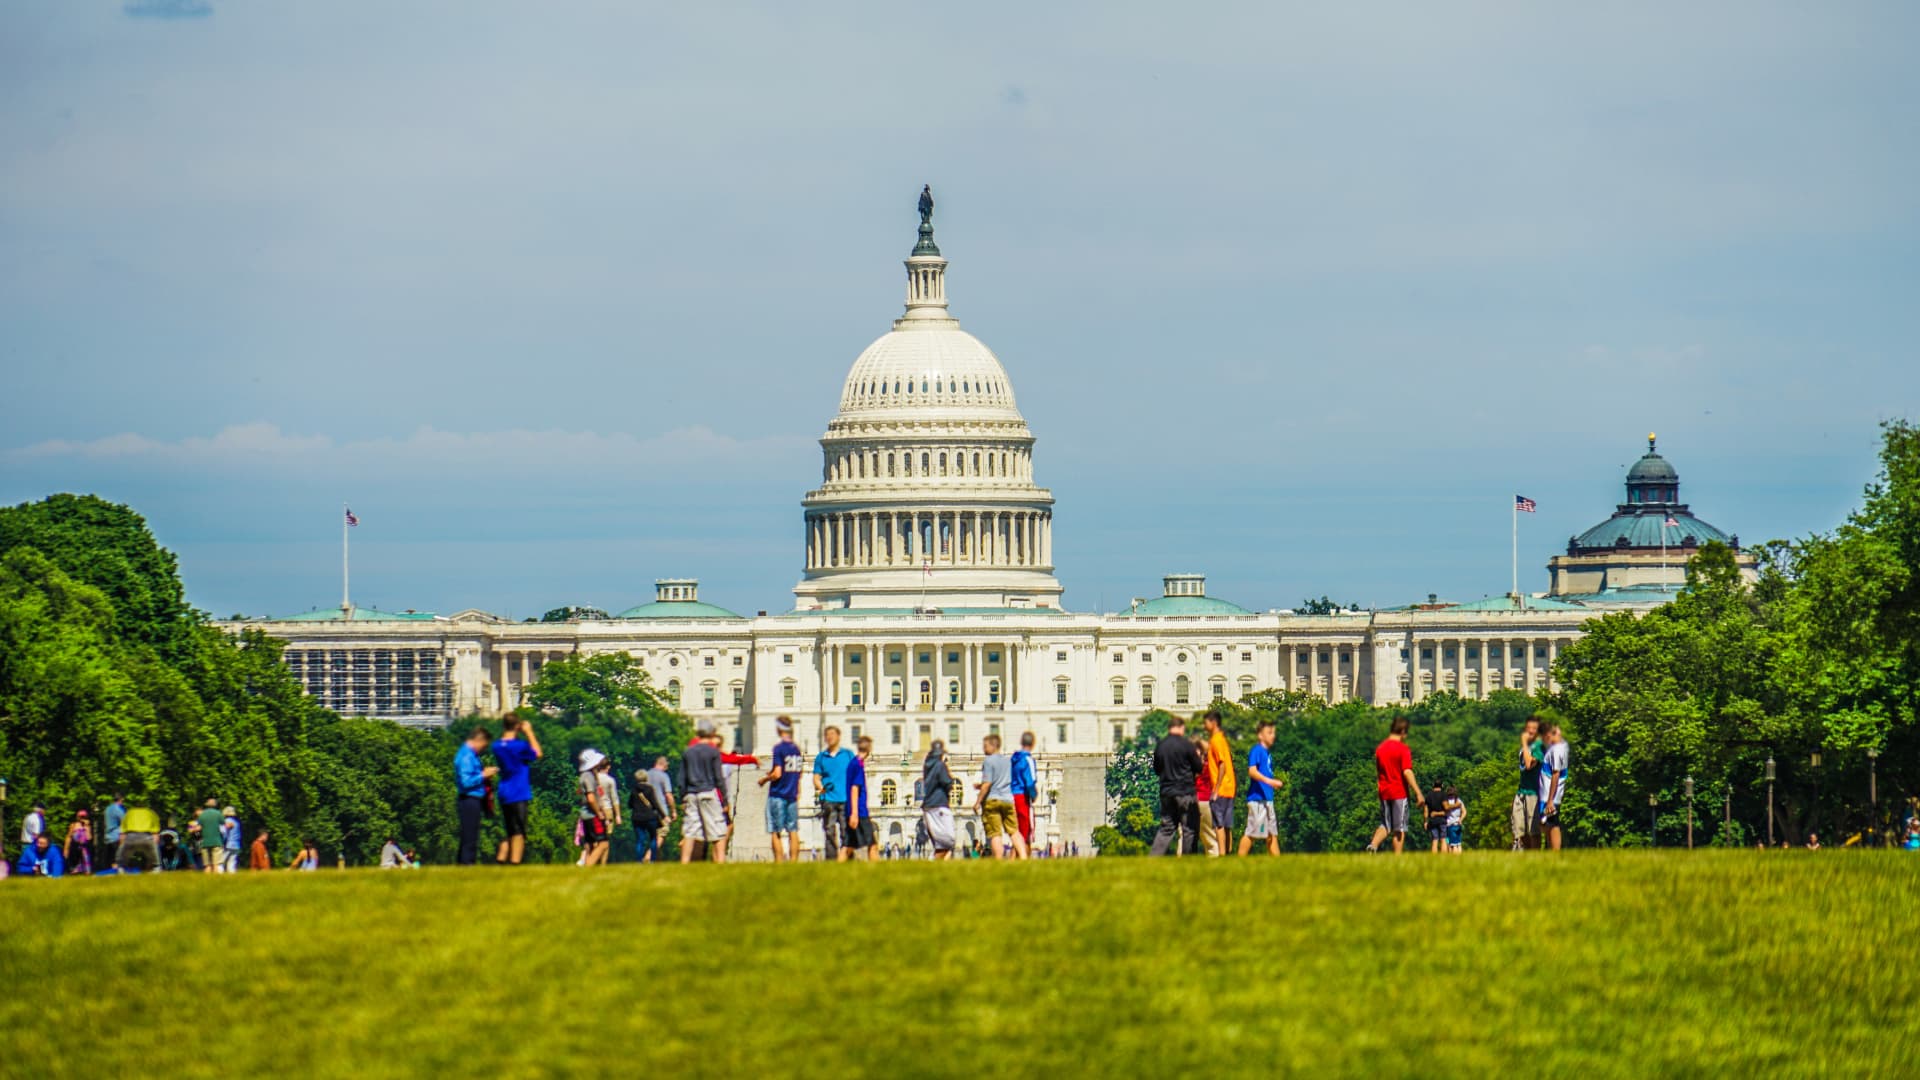 Washington D.C., ranked as the No. 2 greenest place for U.S. homebuyers, according to realtyhop.